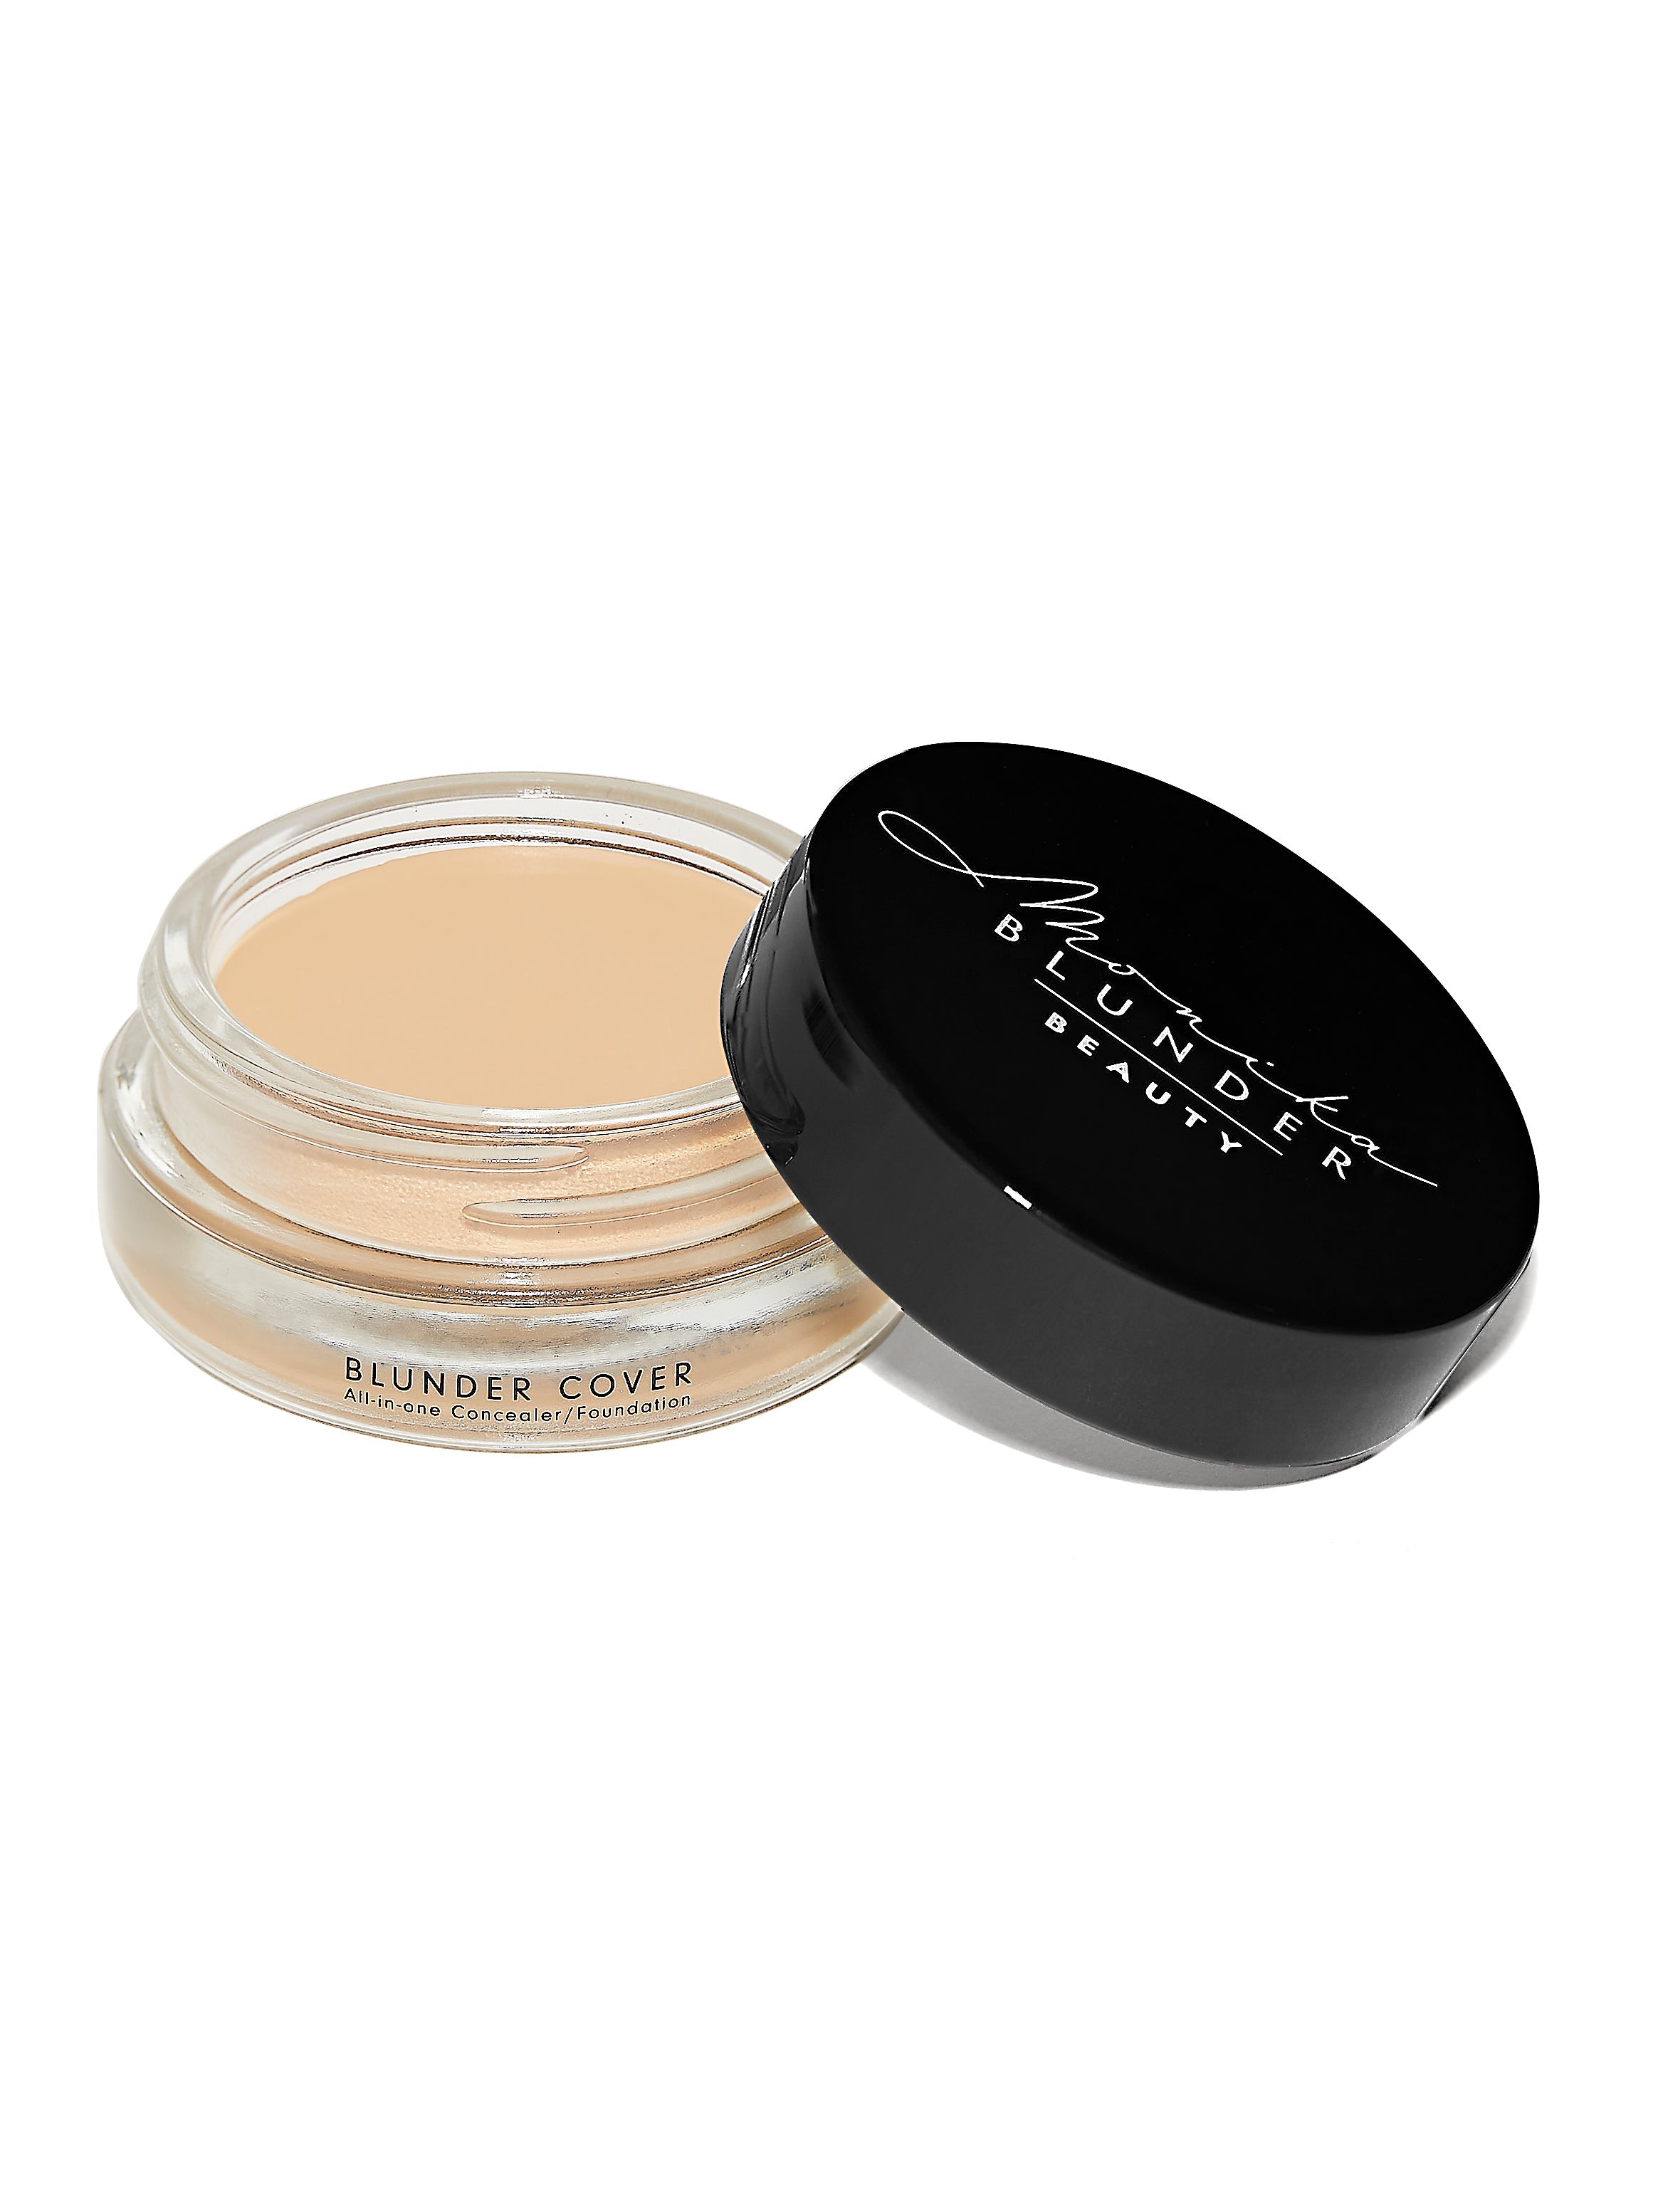 Blunder Cover an All-In-One Foundation/Concealer Shade - ZWEI.5 - 0